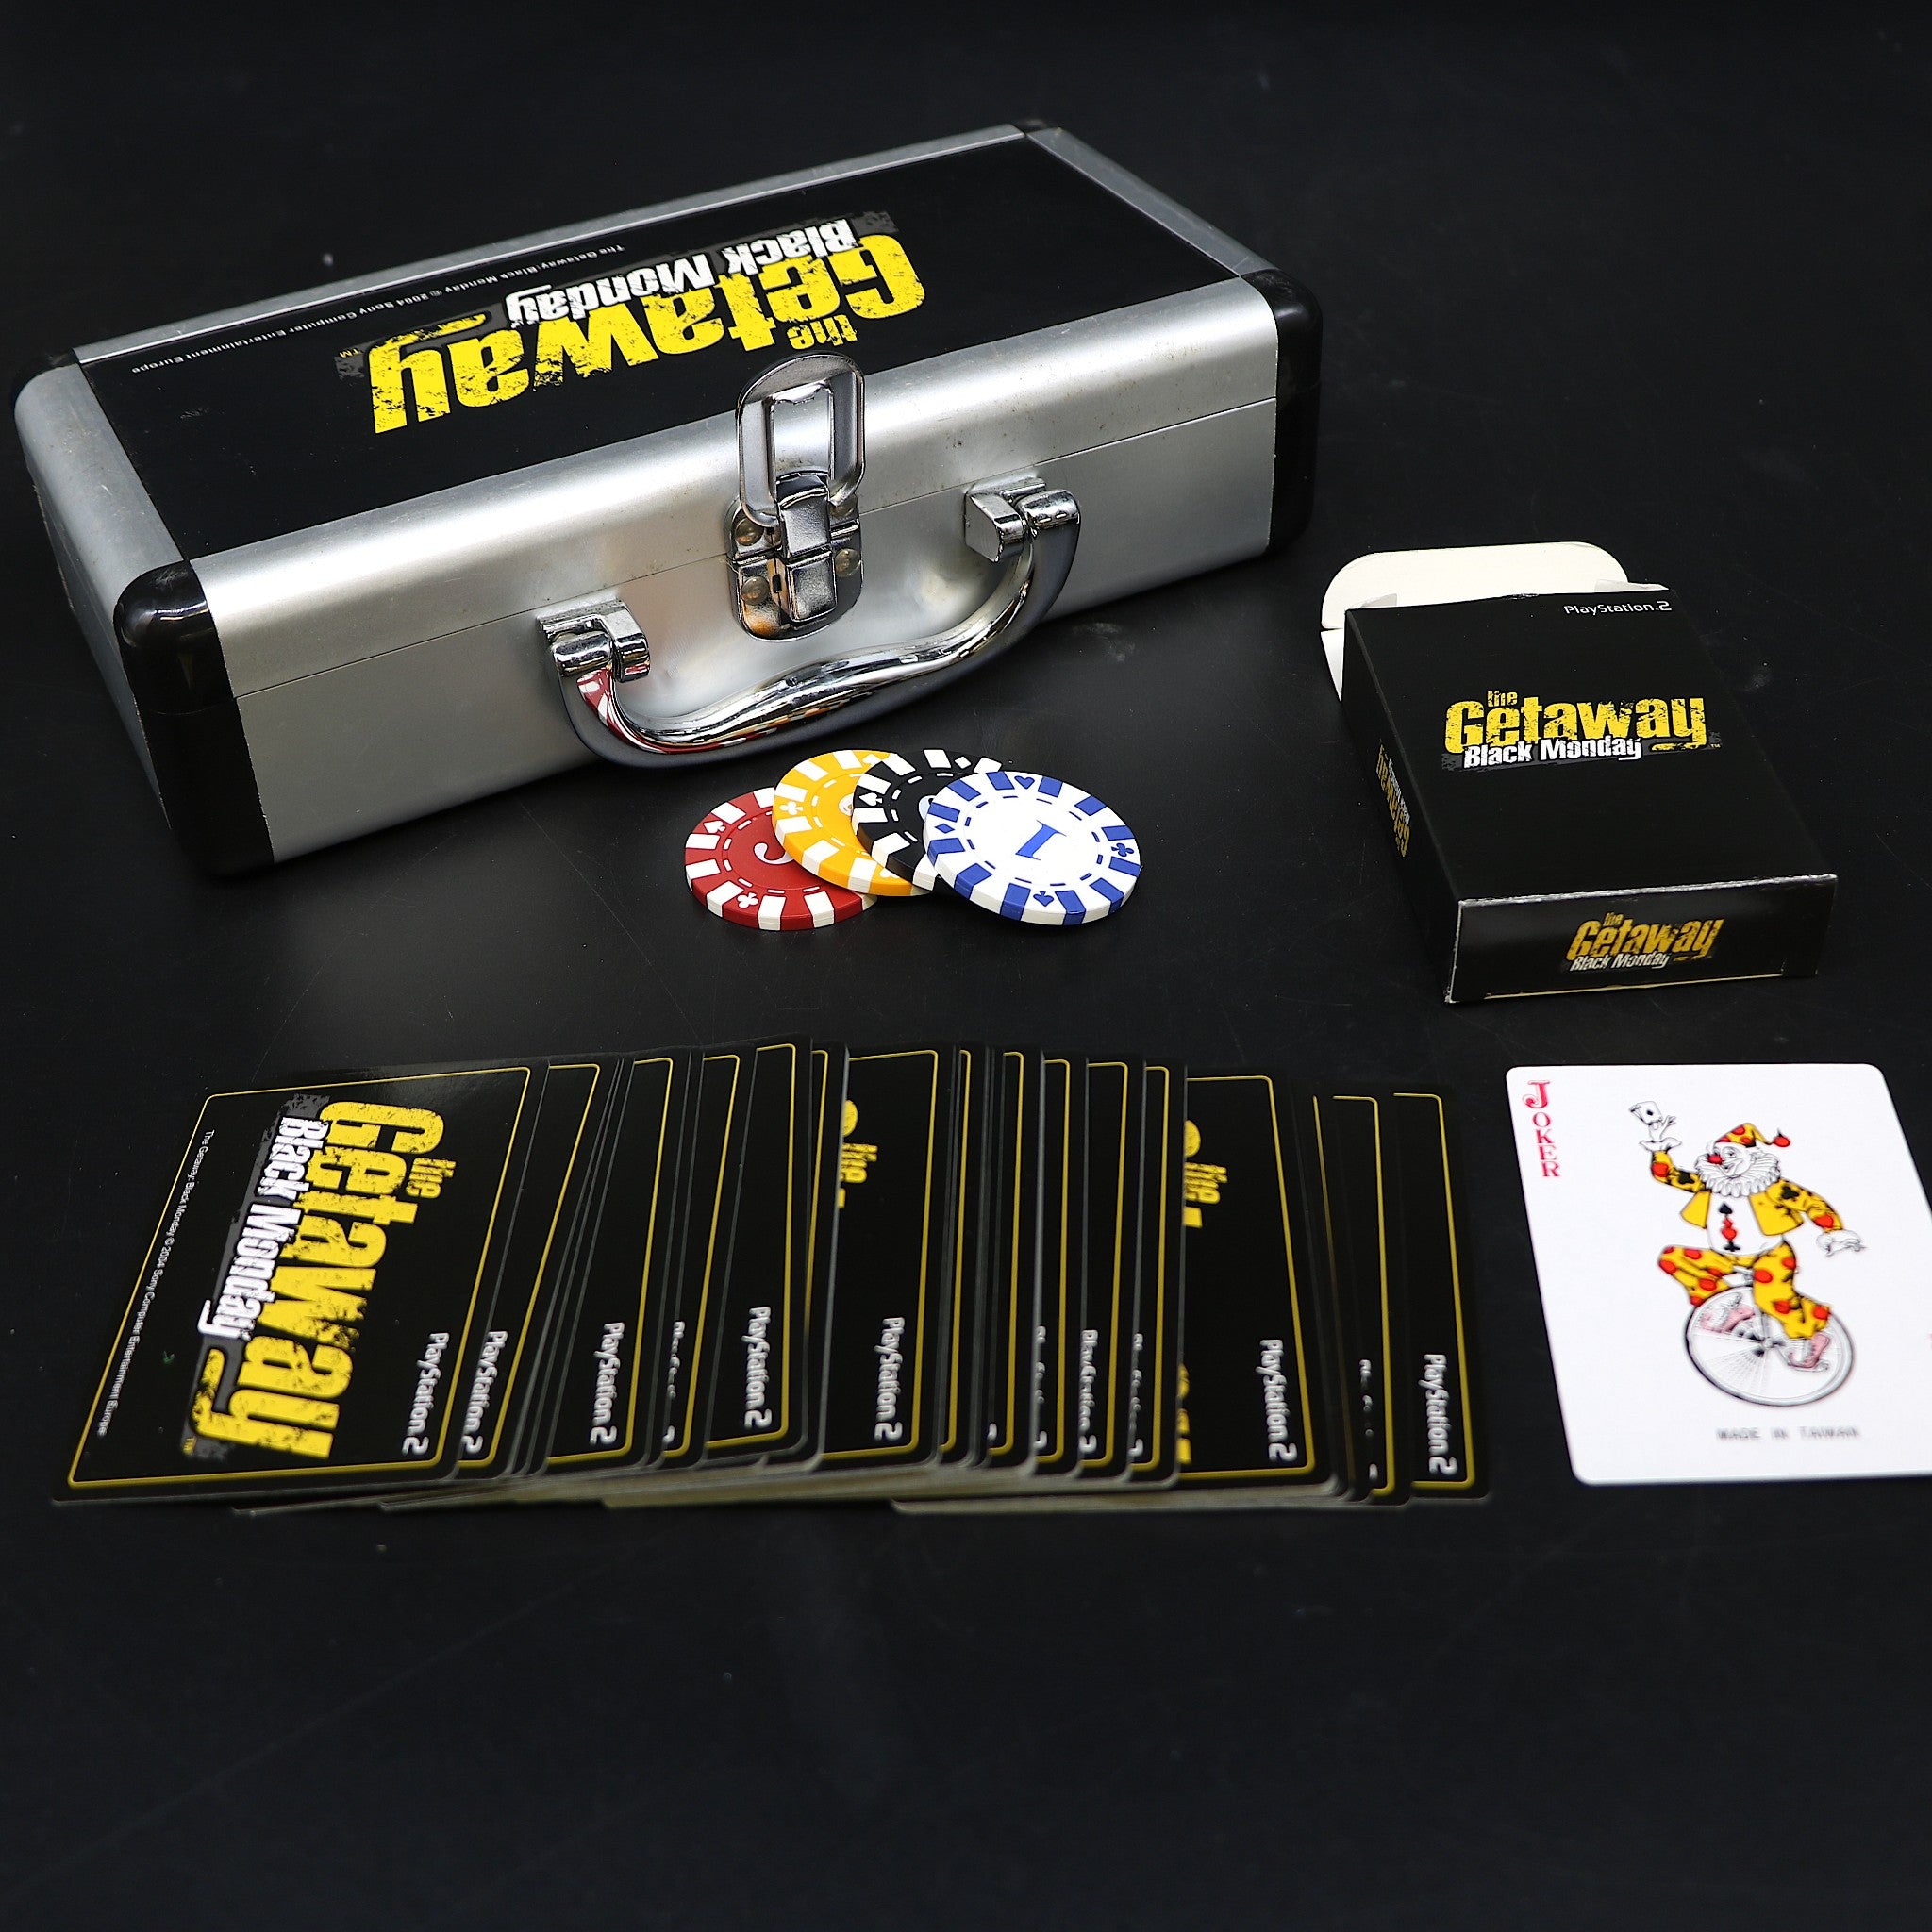 The Getaway Black Monday | Promo Playing Cards & Poker Chips From Sony PS2 Game